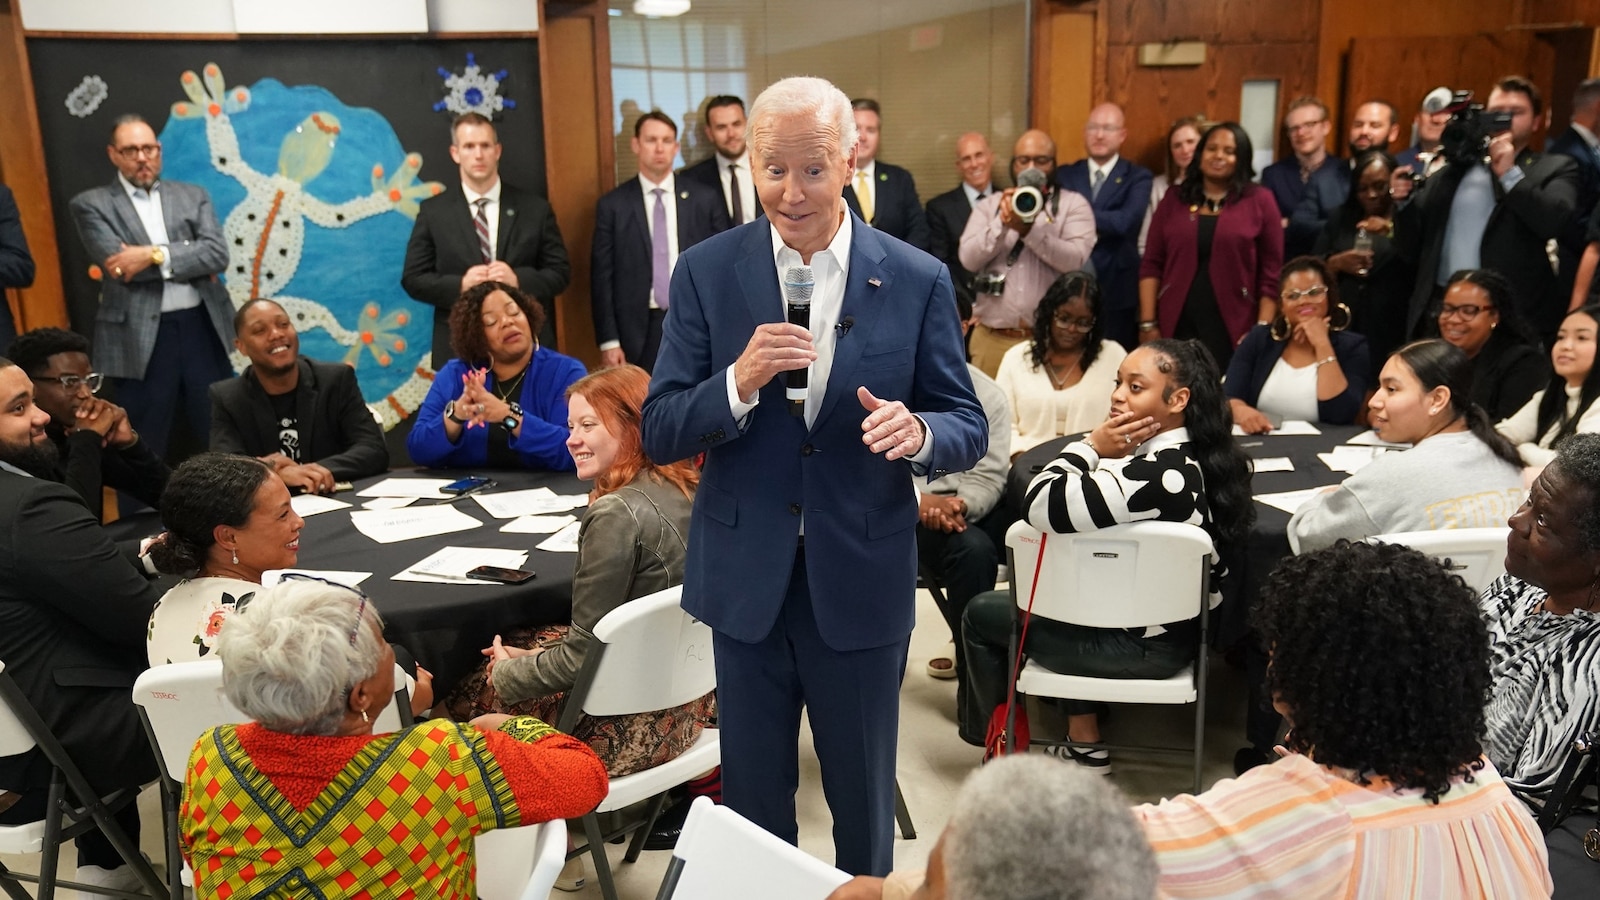 Biden campaign works to woo Black voters in key swing state of Wisconsin [Video]